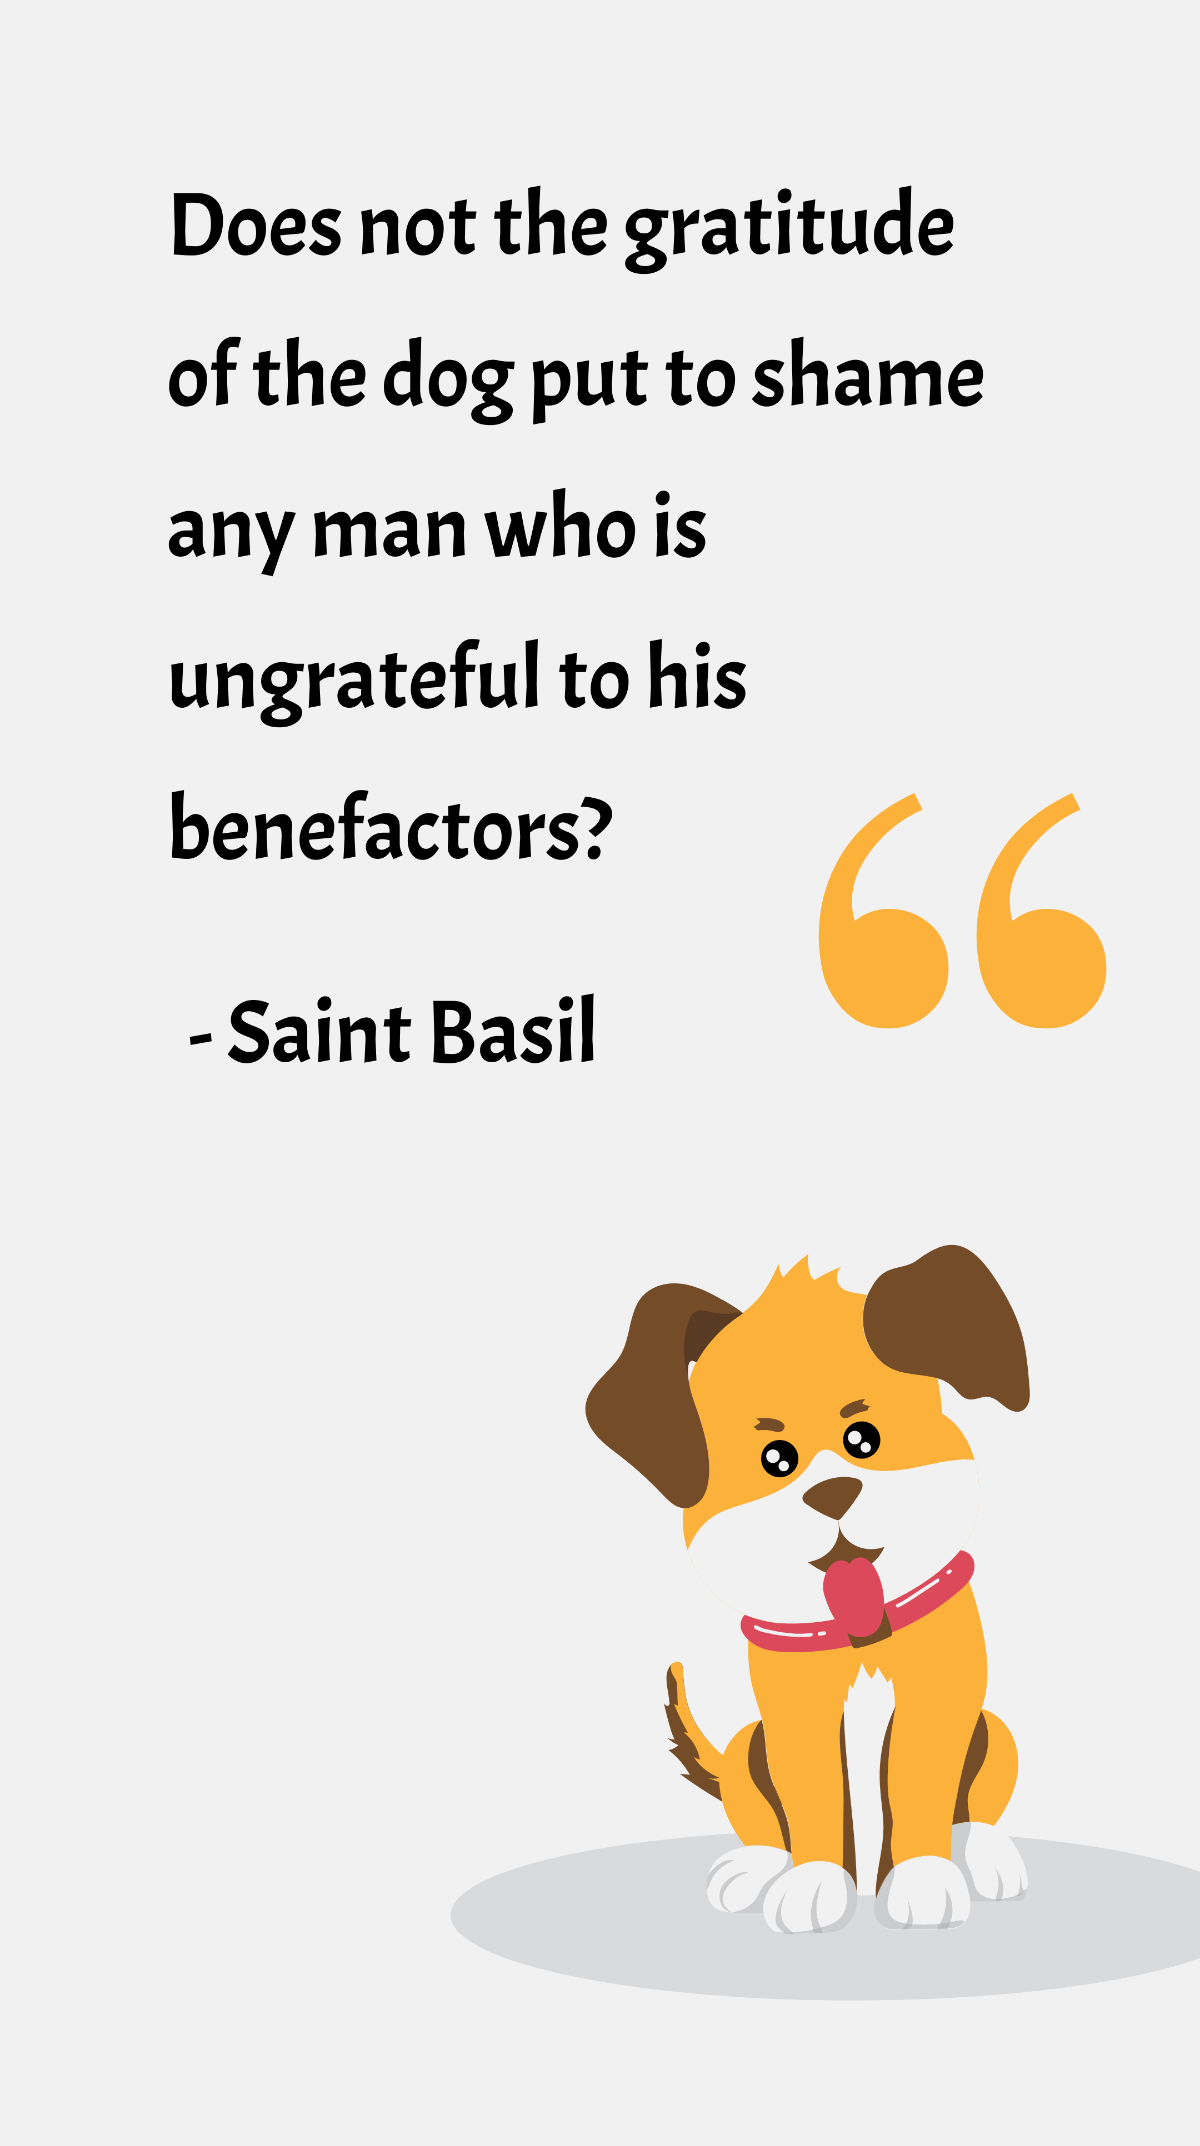 Saint Basil - Does not the gratitude of the dog put to shame any man who is ungrateful to his benefactors? Template